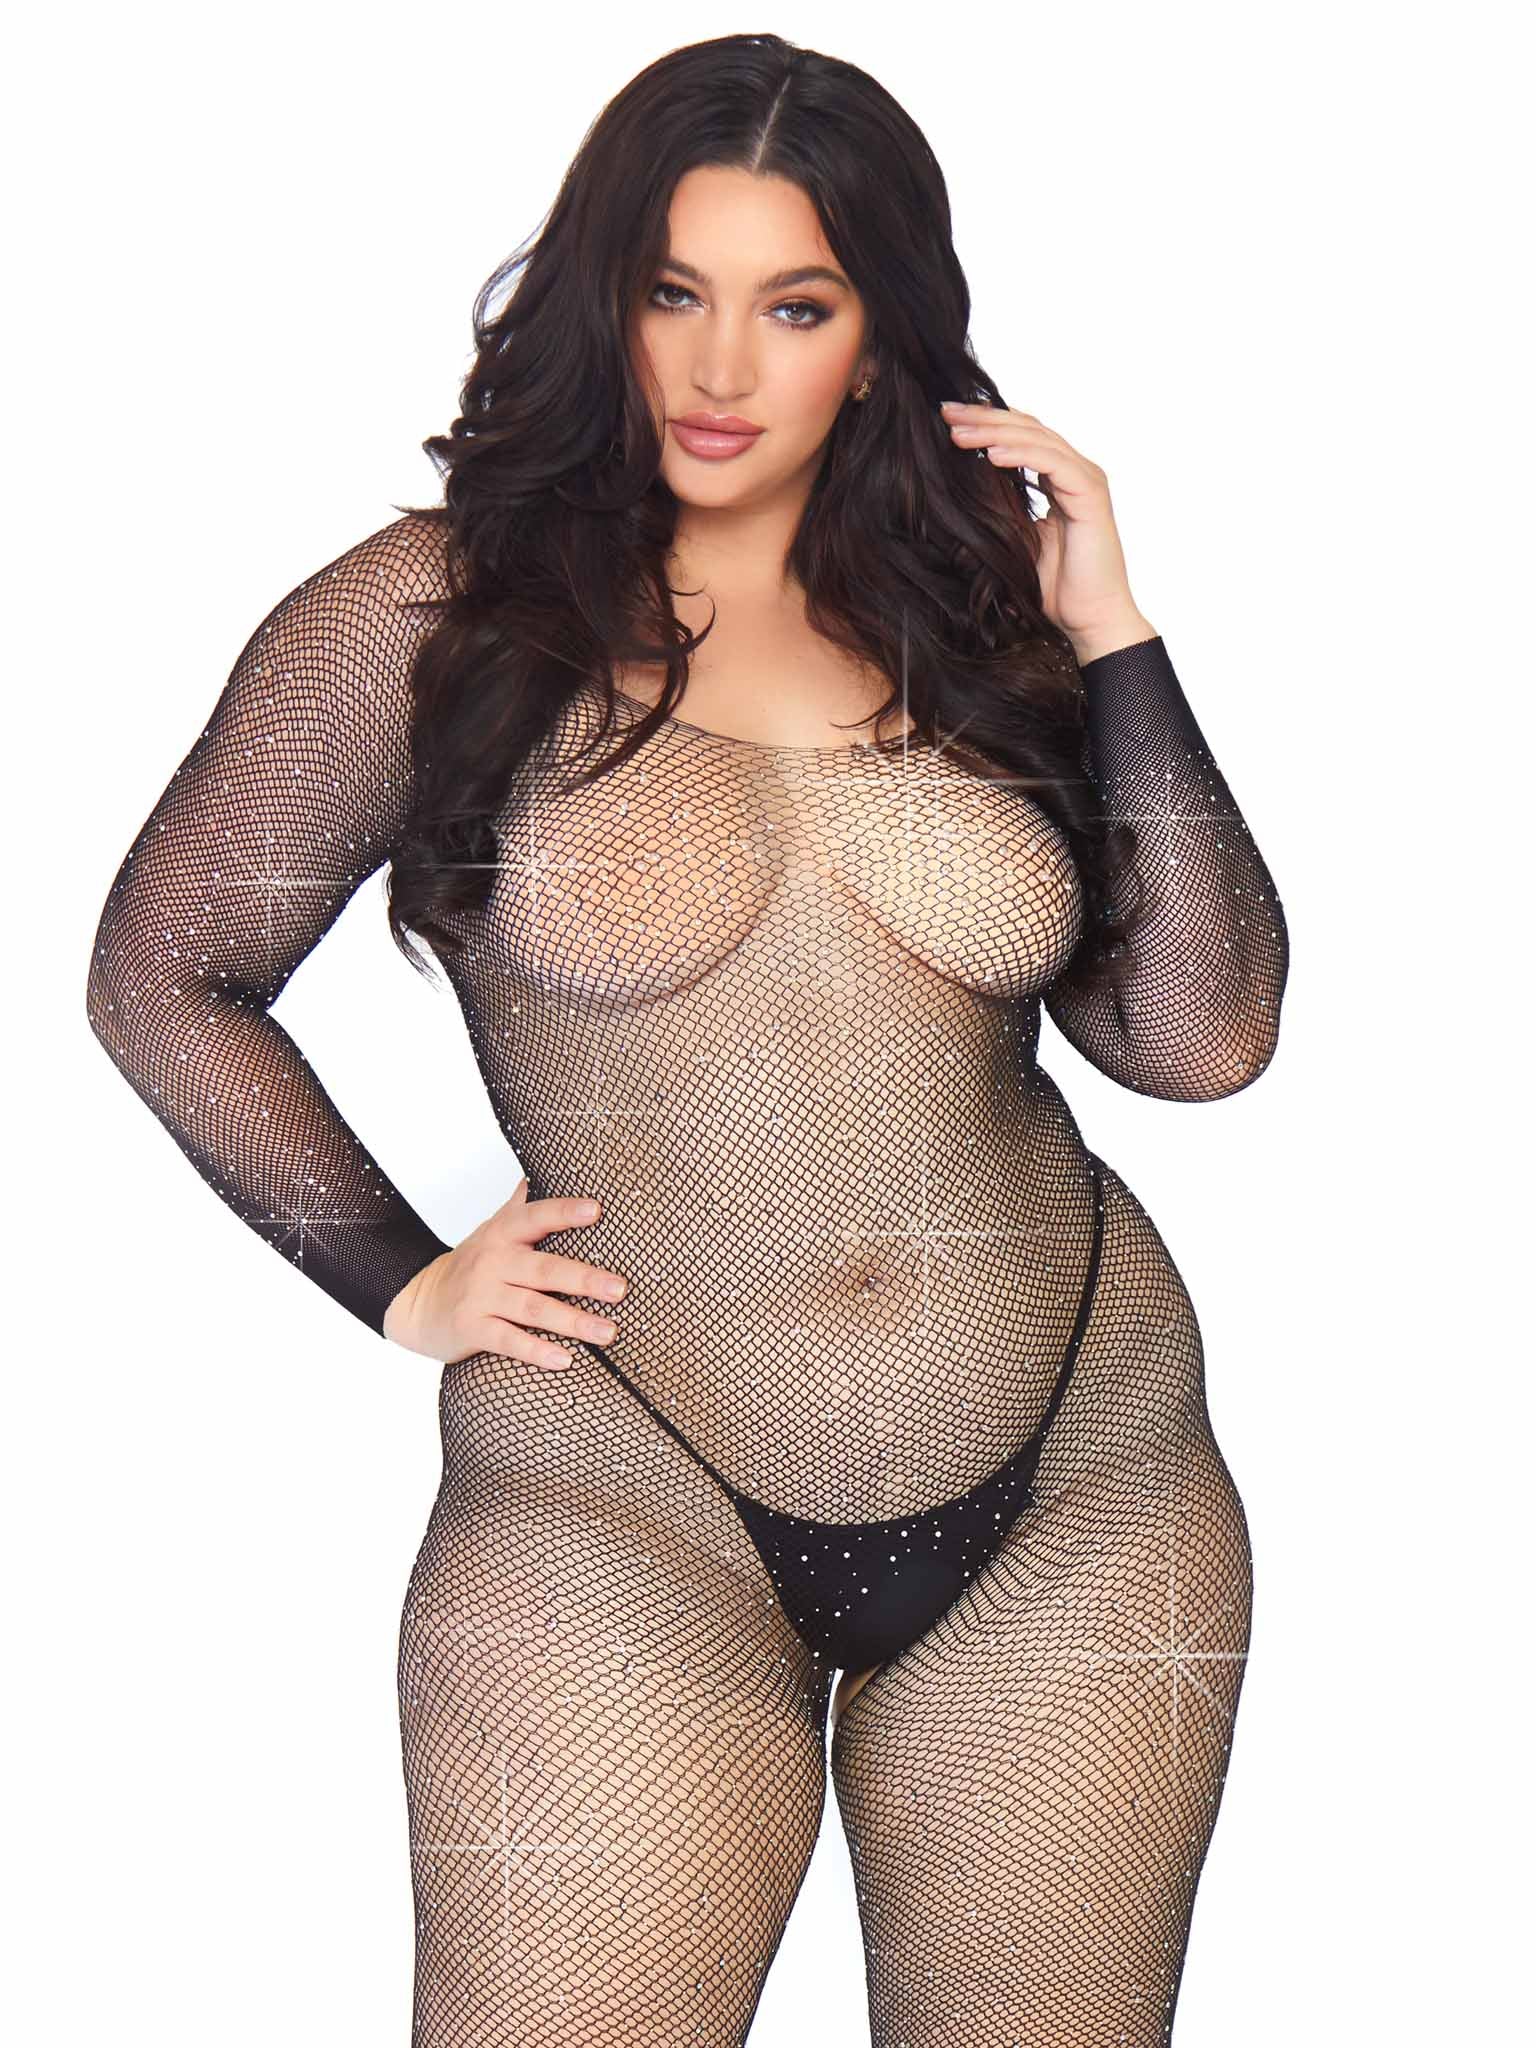 Crystalized Seamless Fishnet